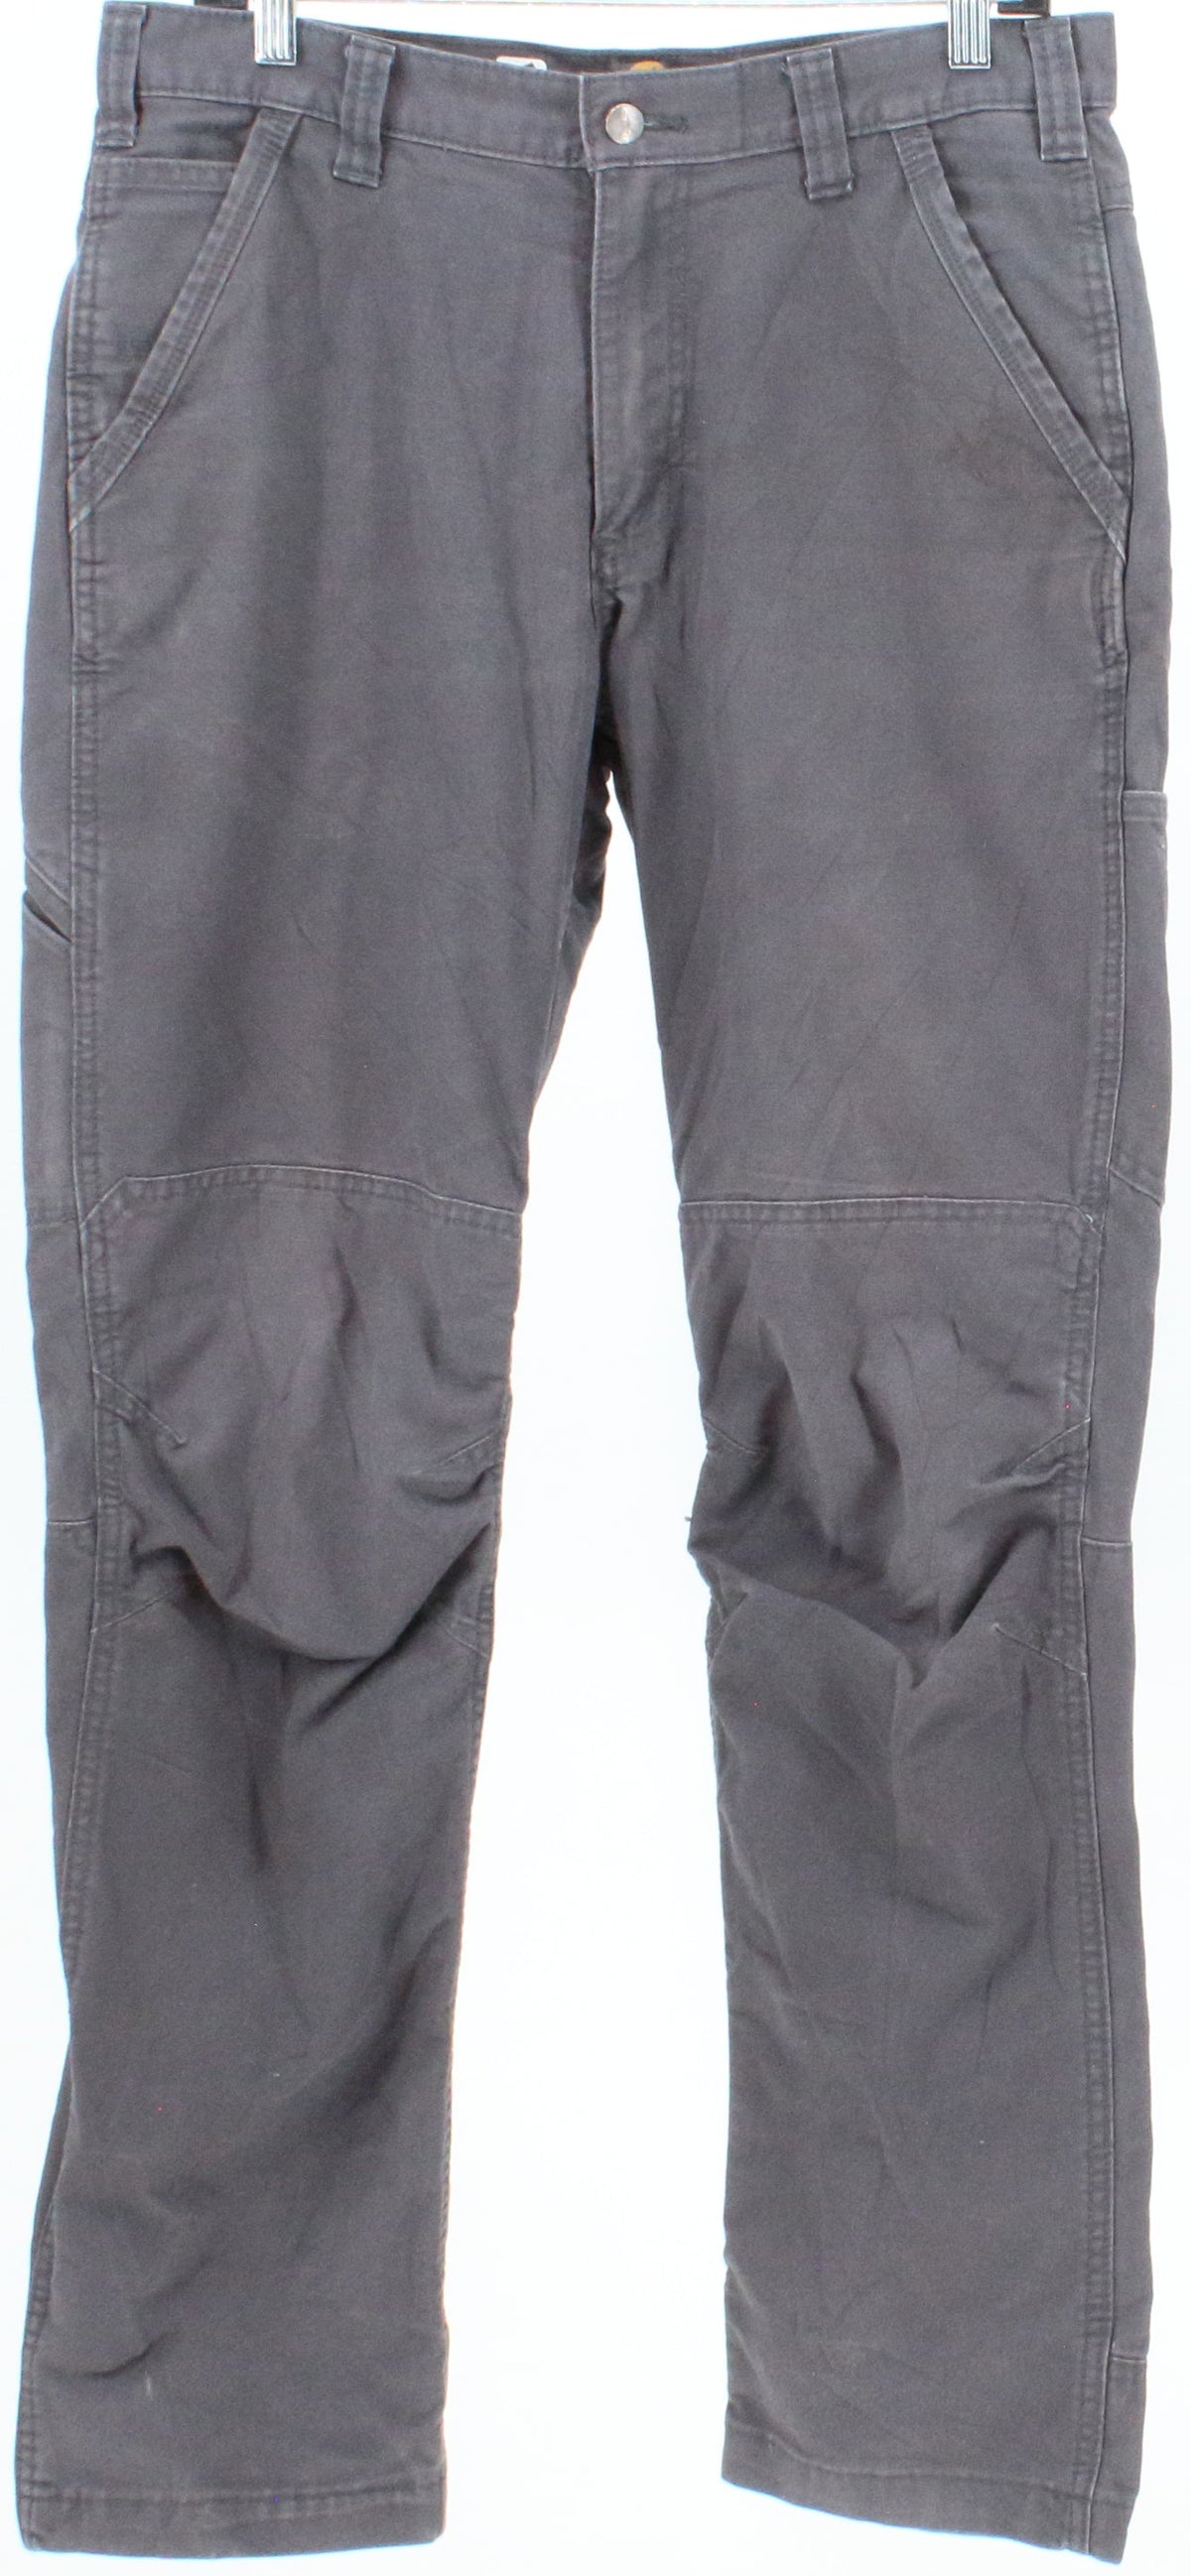 Carhartt Relaxed Fit Full Swing Grey Pants